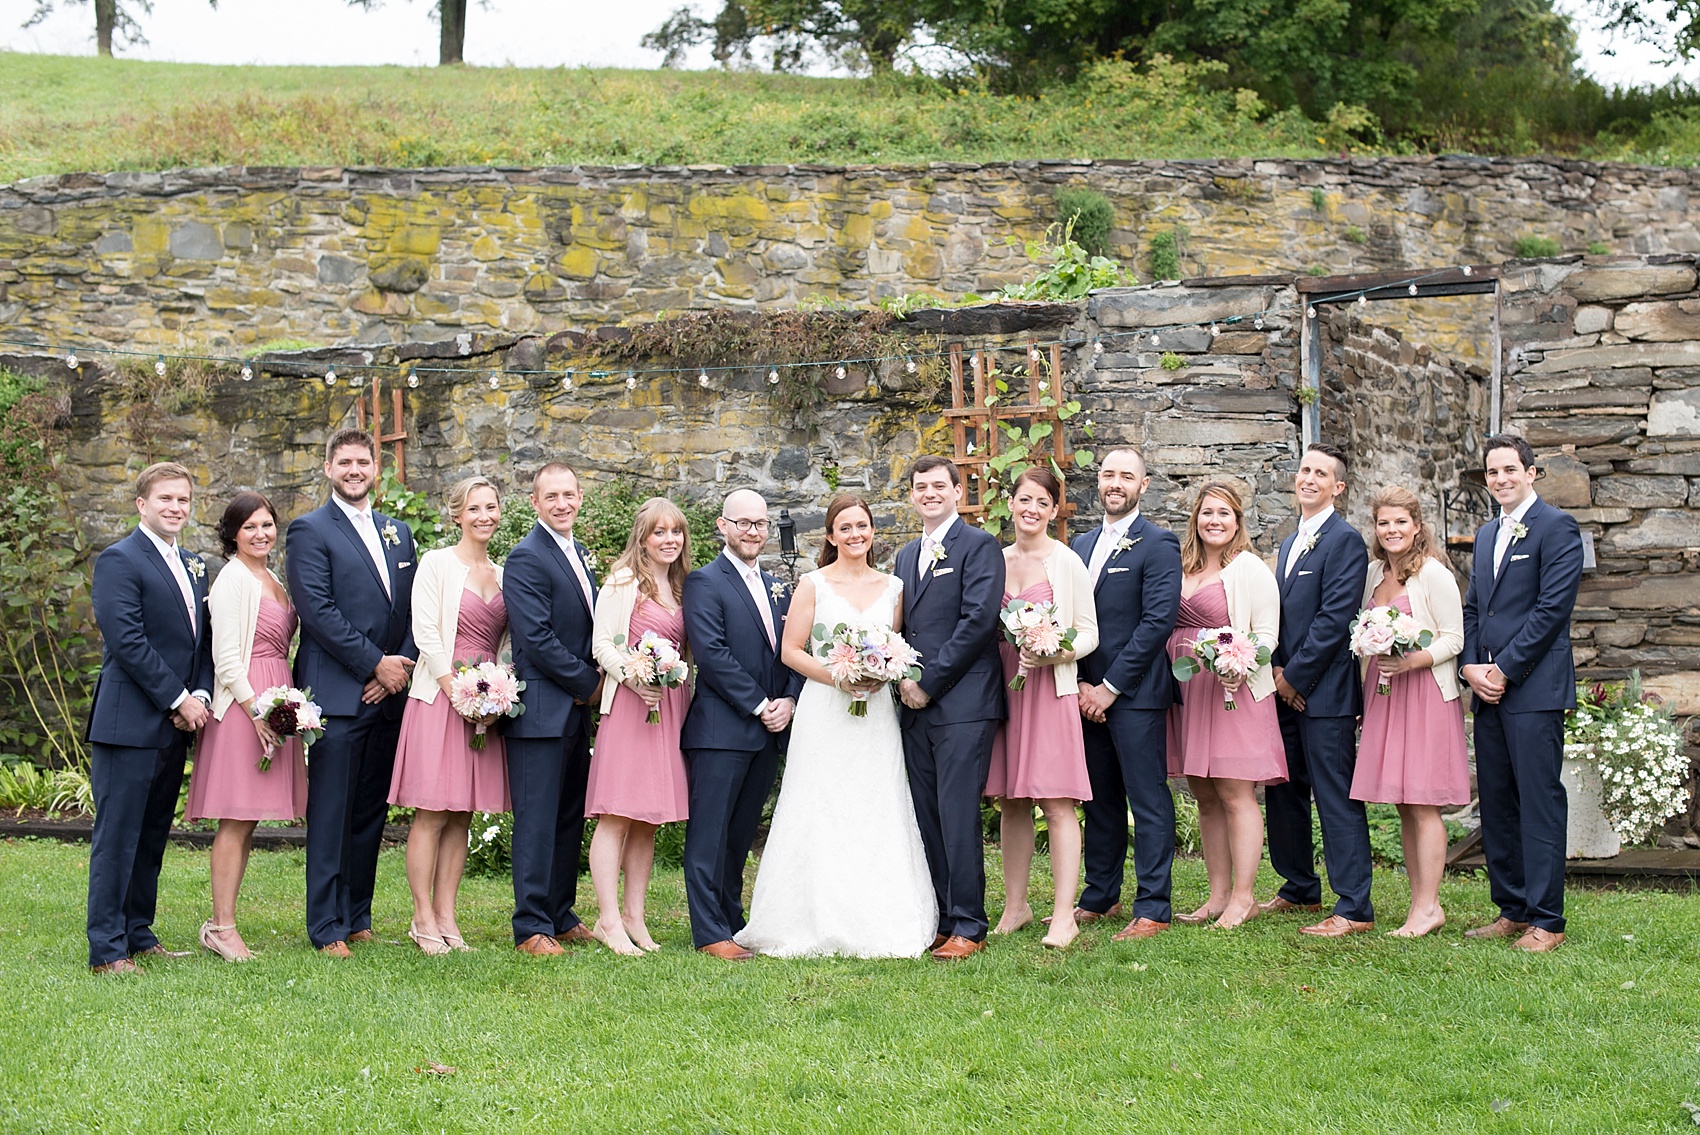 Red Maple Vineyard wedding. Photos by Mikkel Paige Photography. Bridesmaids in dusty rose short dresses and off white cardigans.